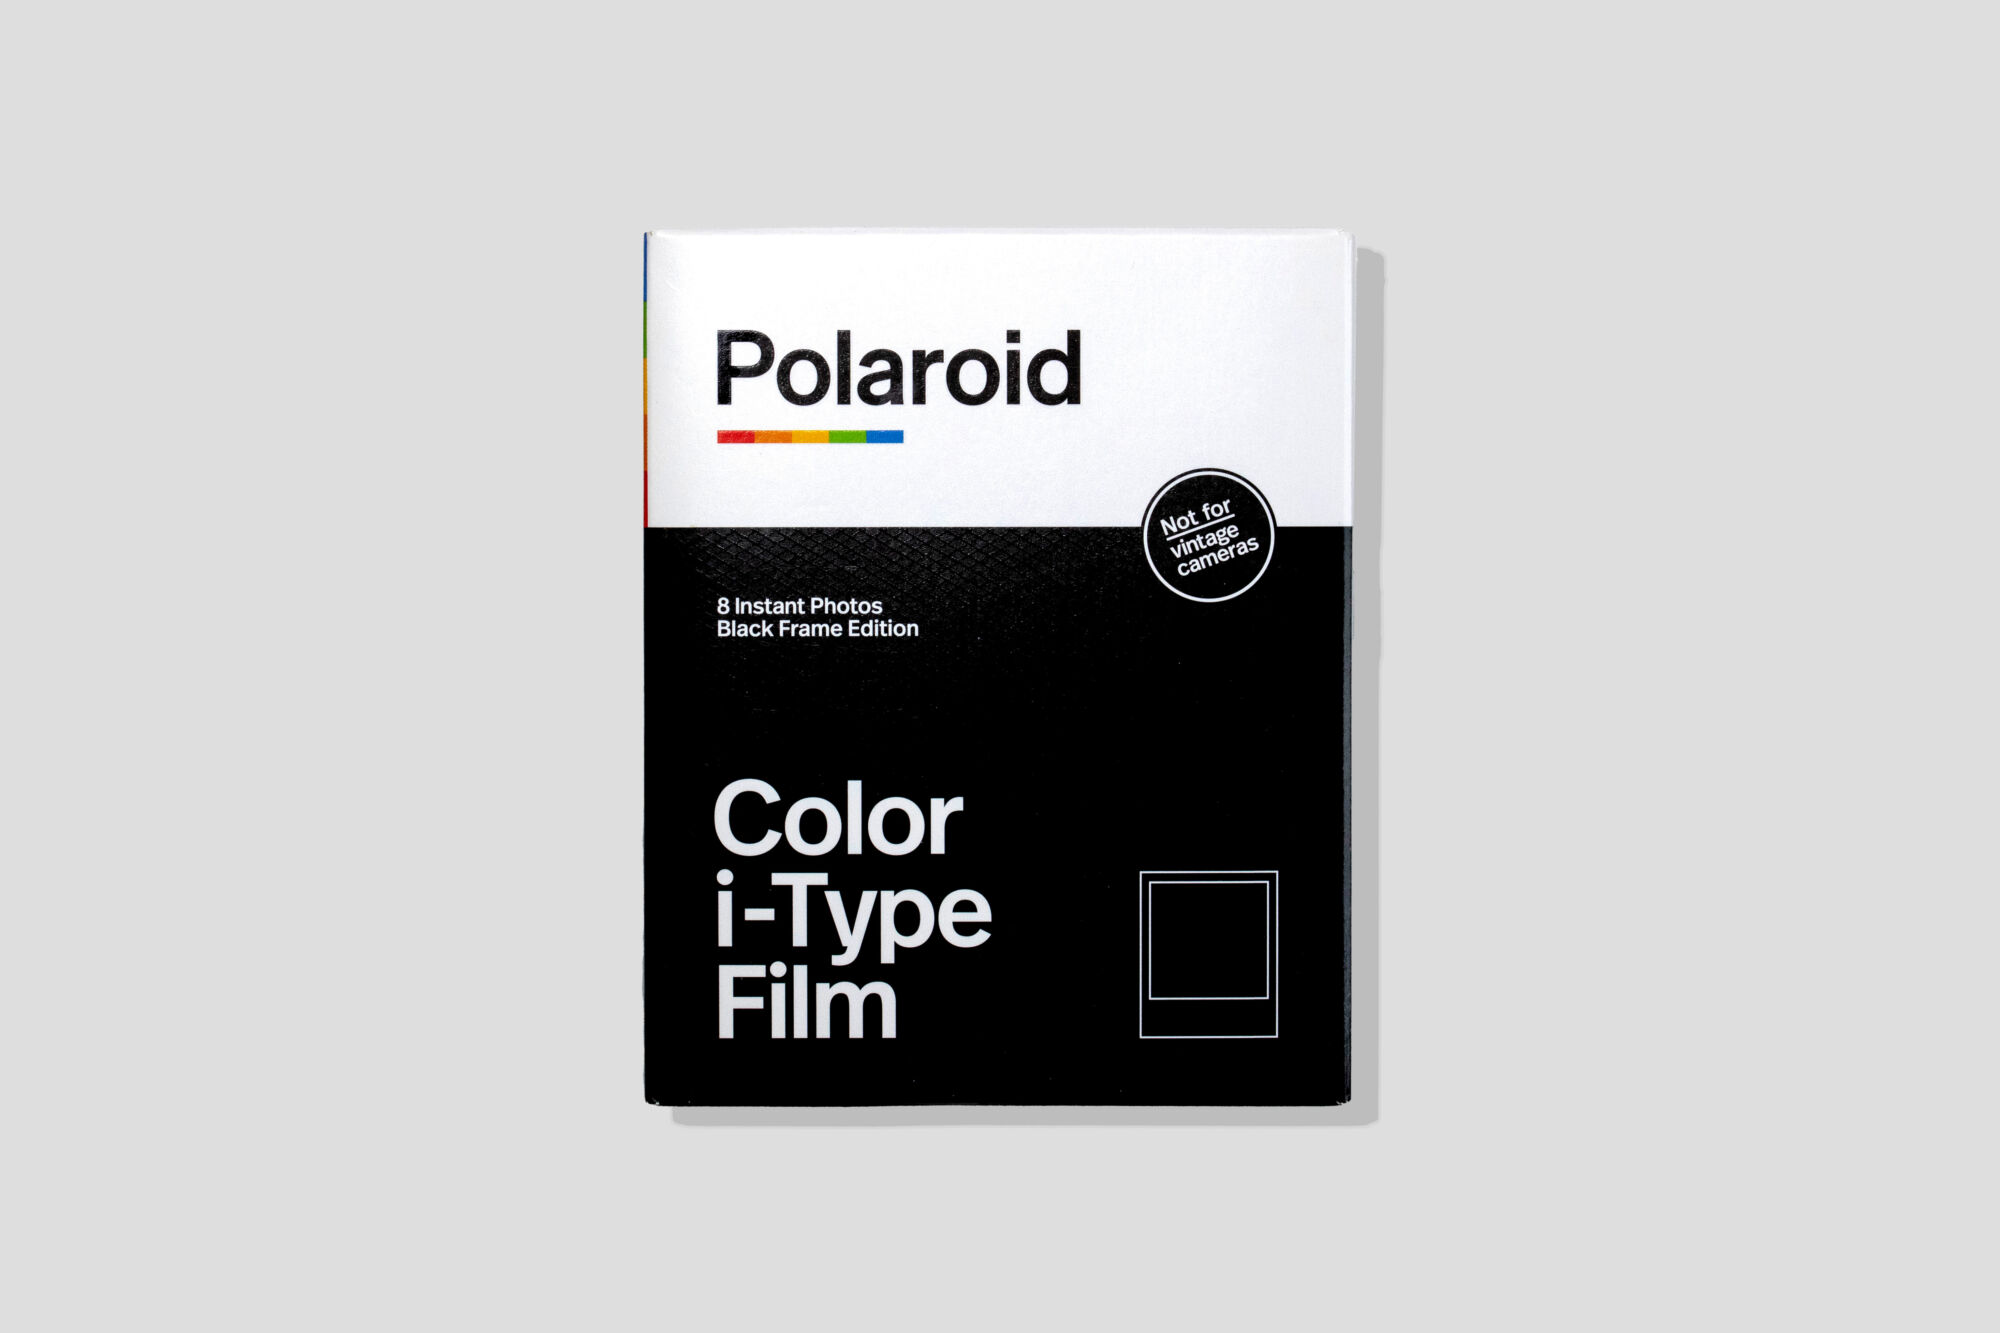 Polaroid Color i-Type Instant Film David Bowie Edition